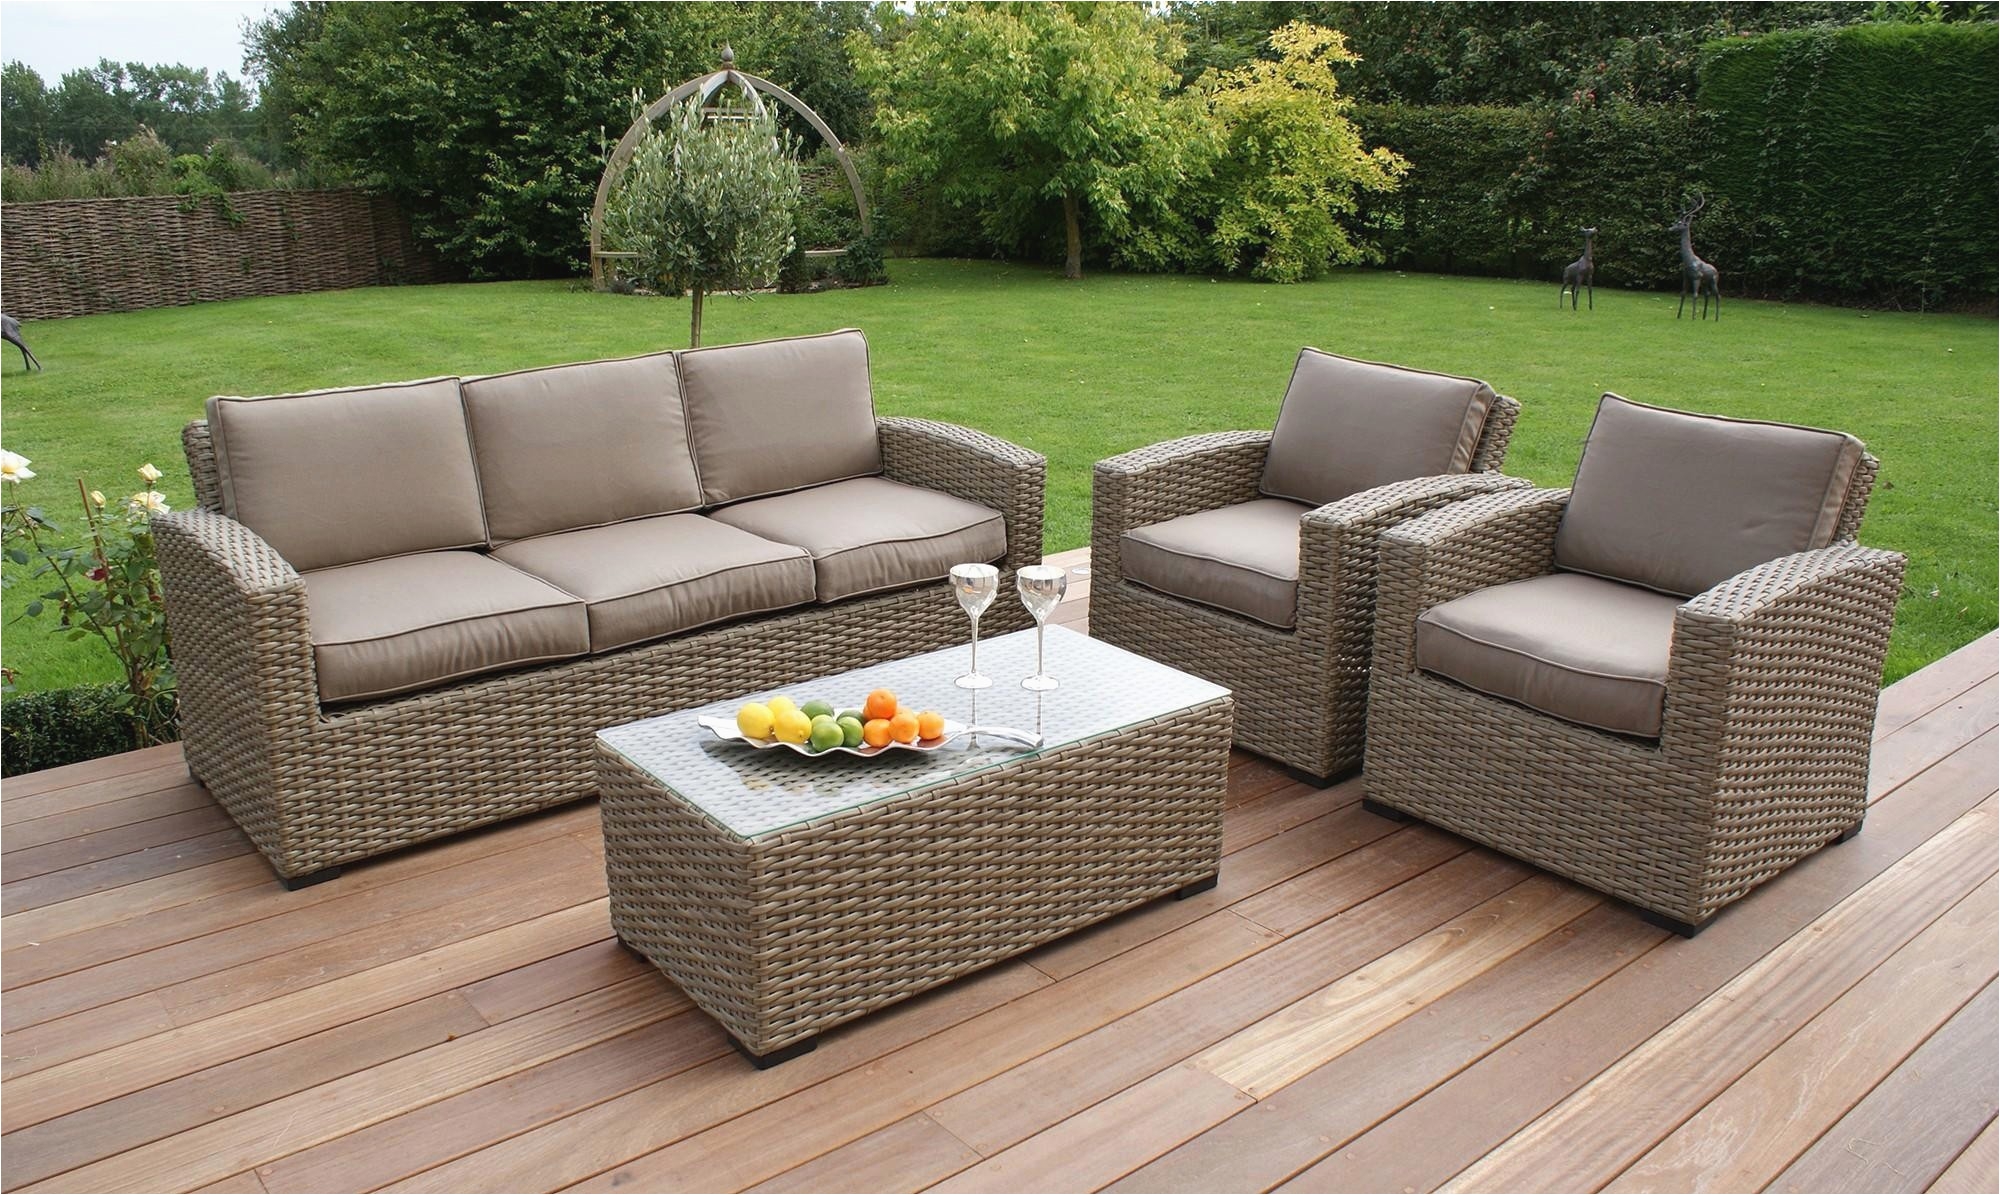 buy used patio furniture awesome outdoor sofa 0d patio chairs sale concept used outdoor furniture